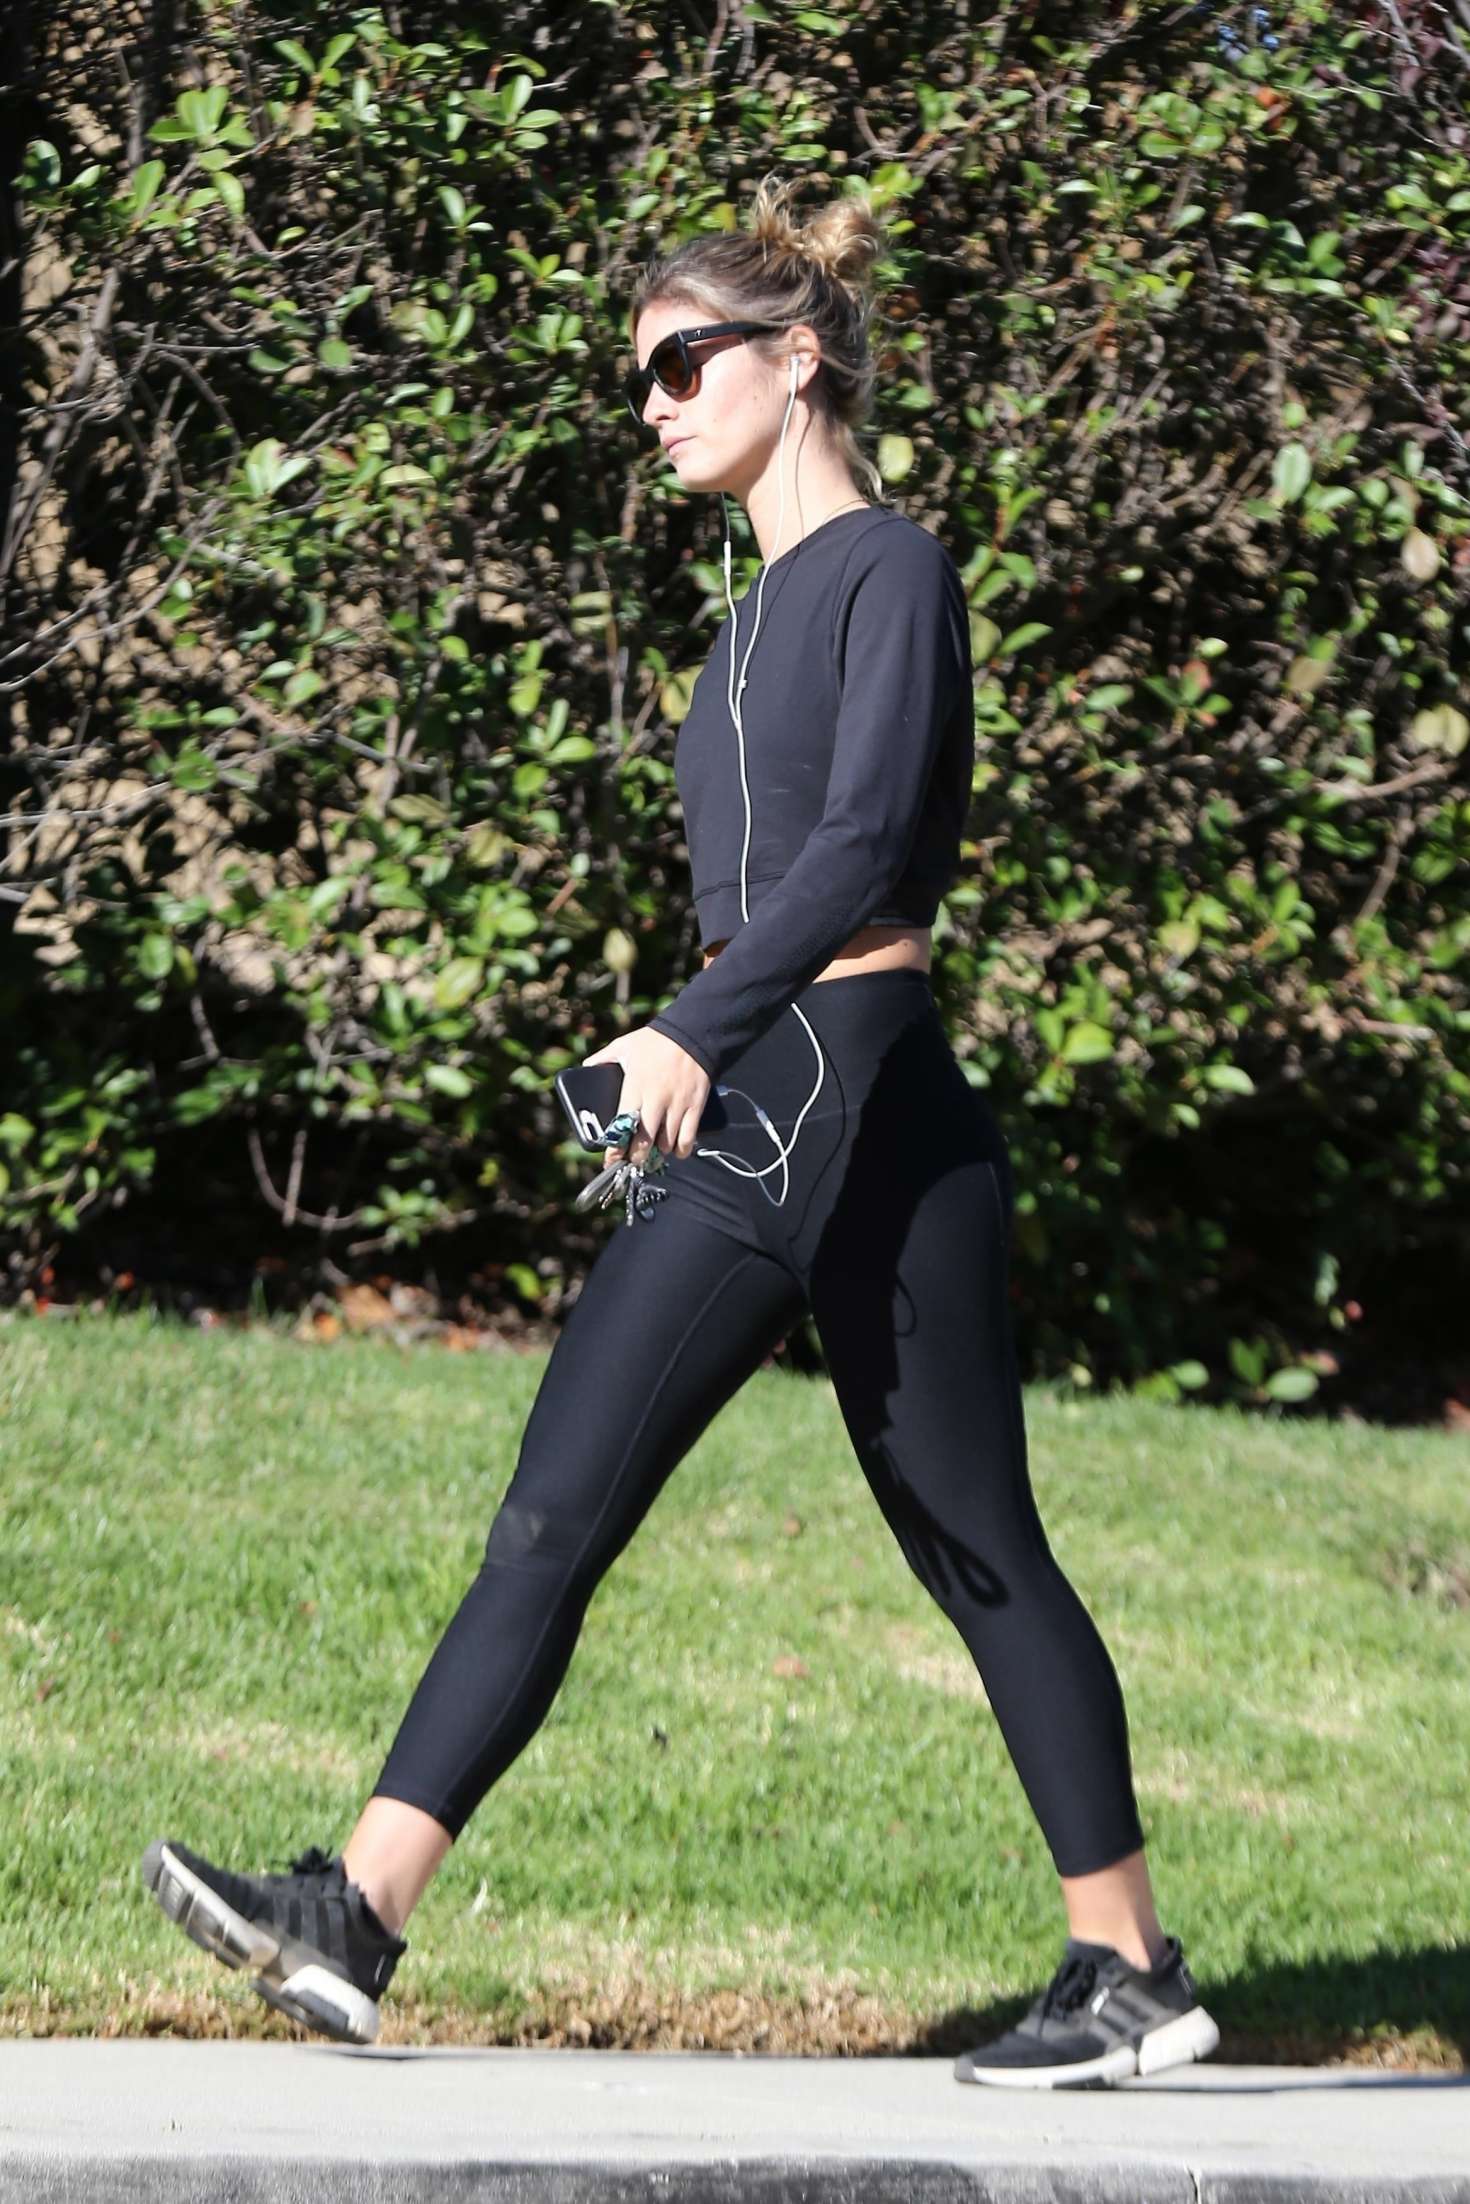 Shauna Sexton in Leggings â€“ Out for a hike in Los Angeles